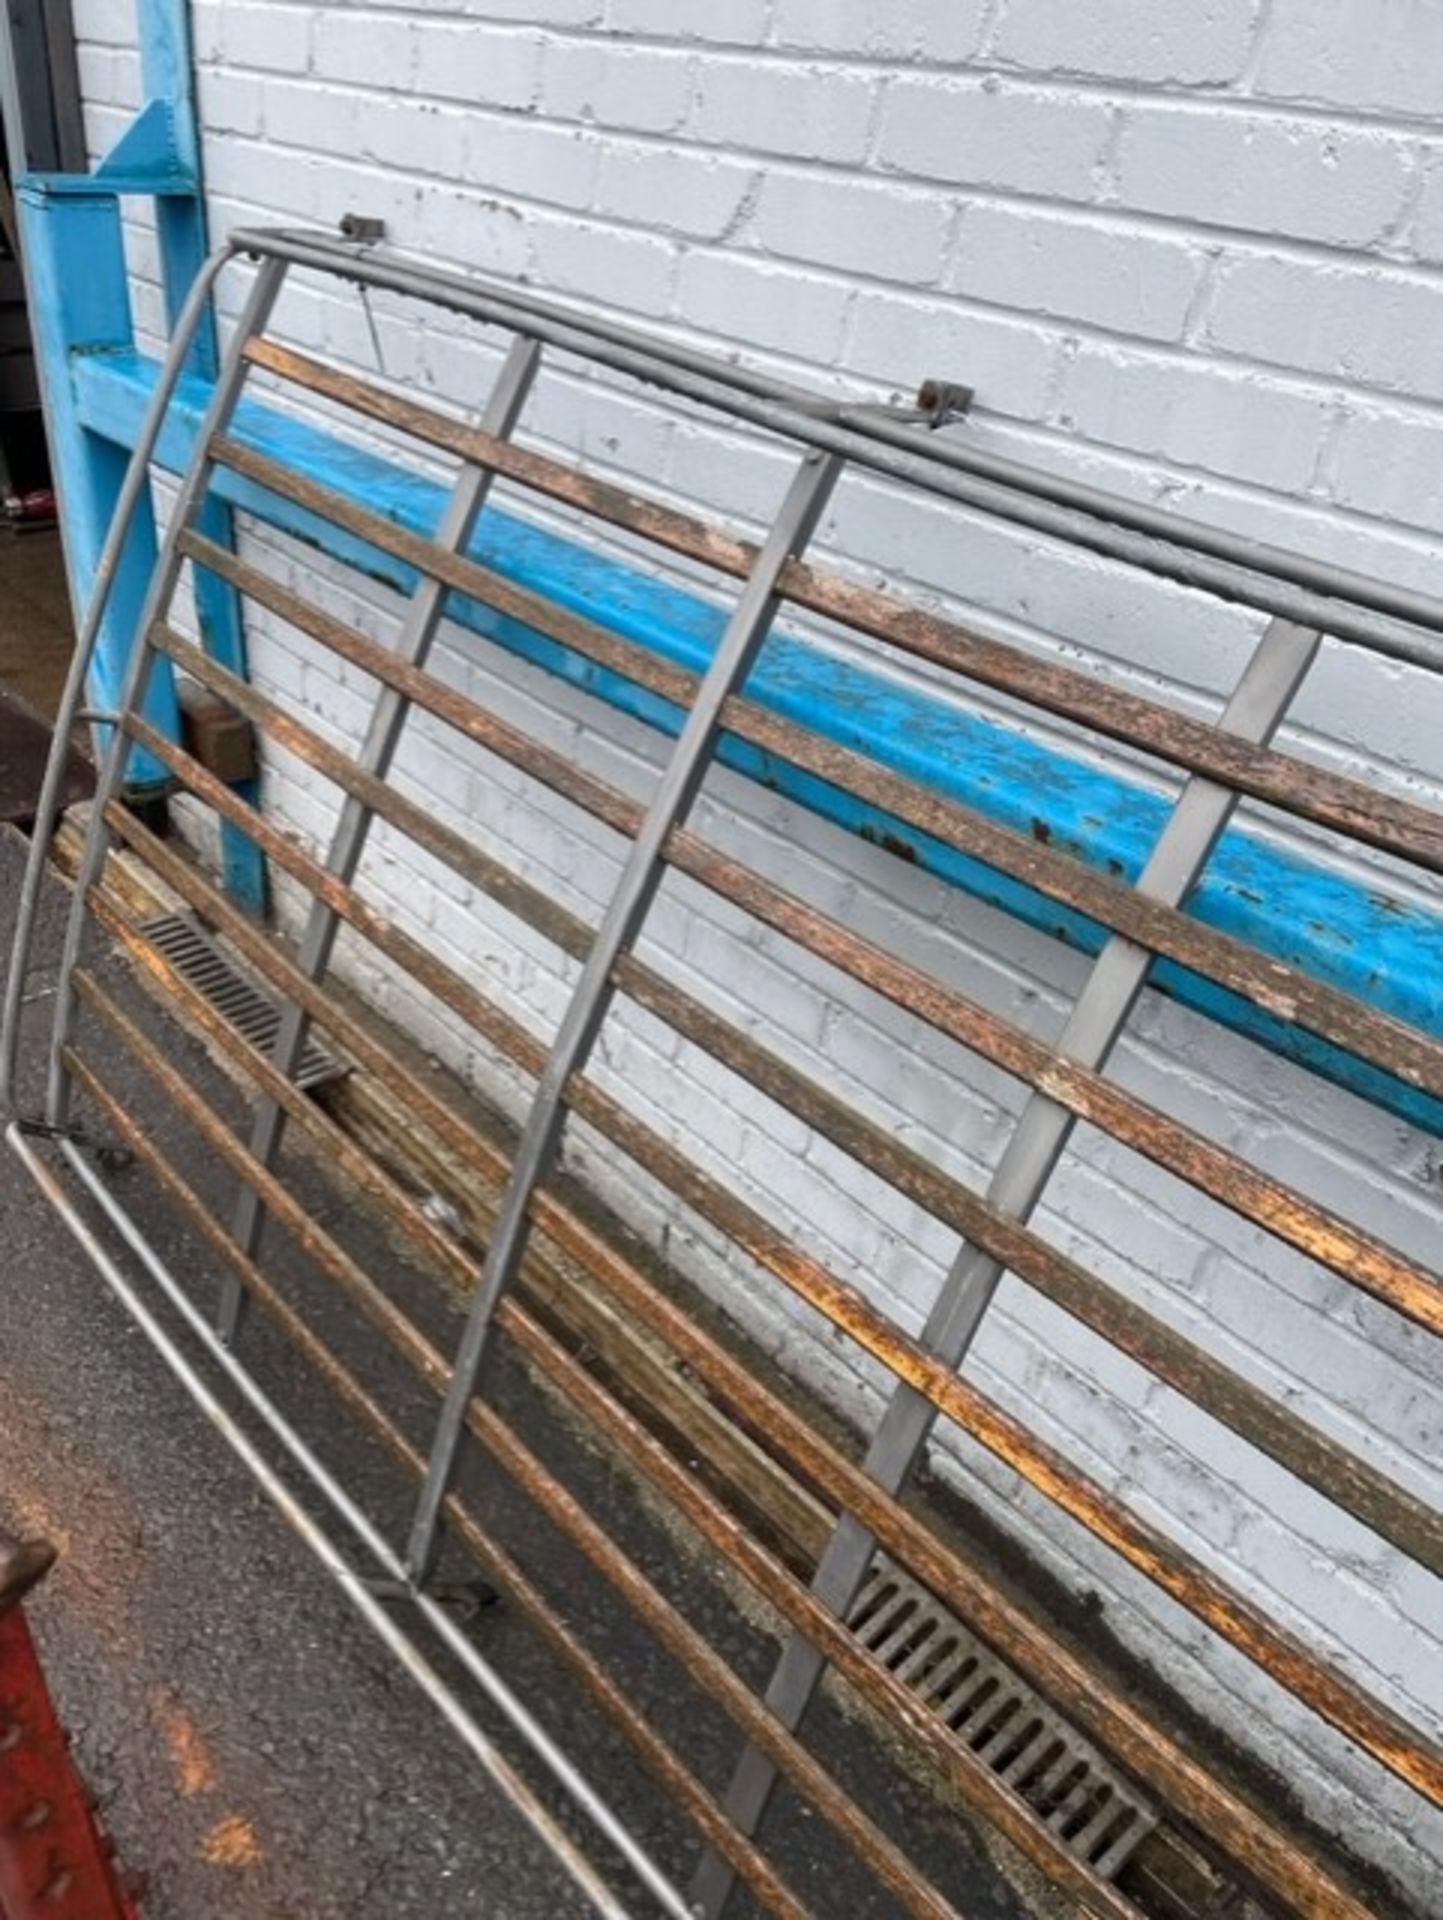 Old version vw camper van roof rack in fair condition if you have them you will know what this is